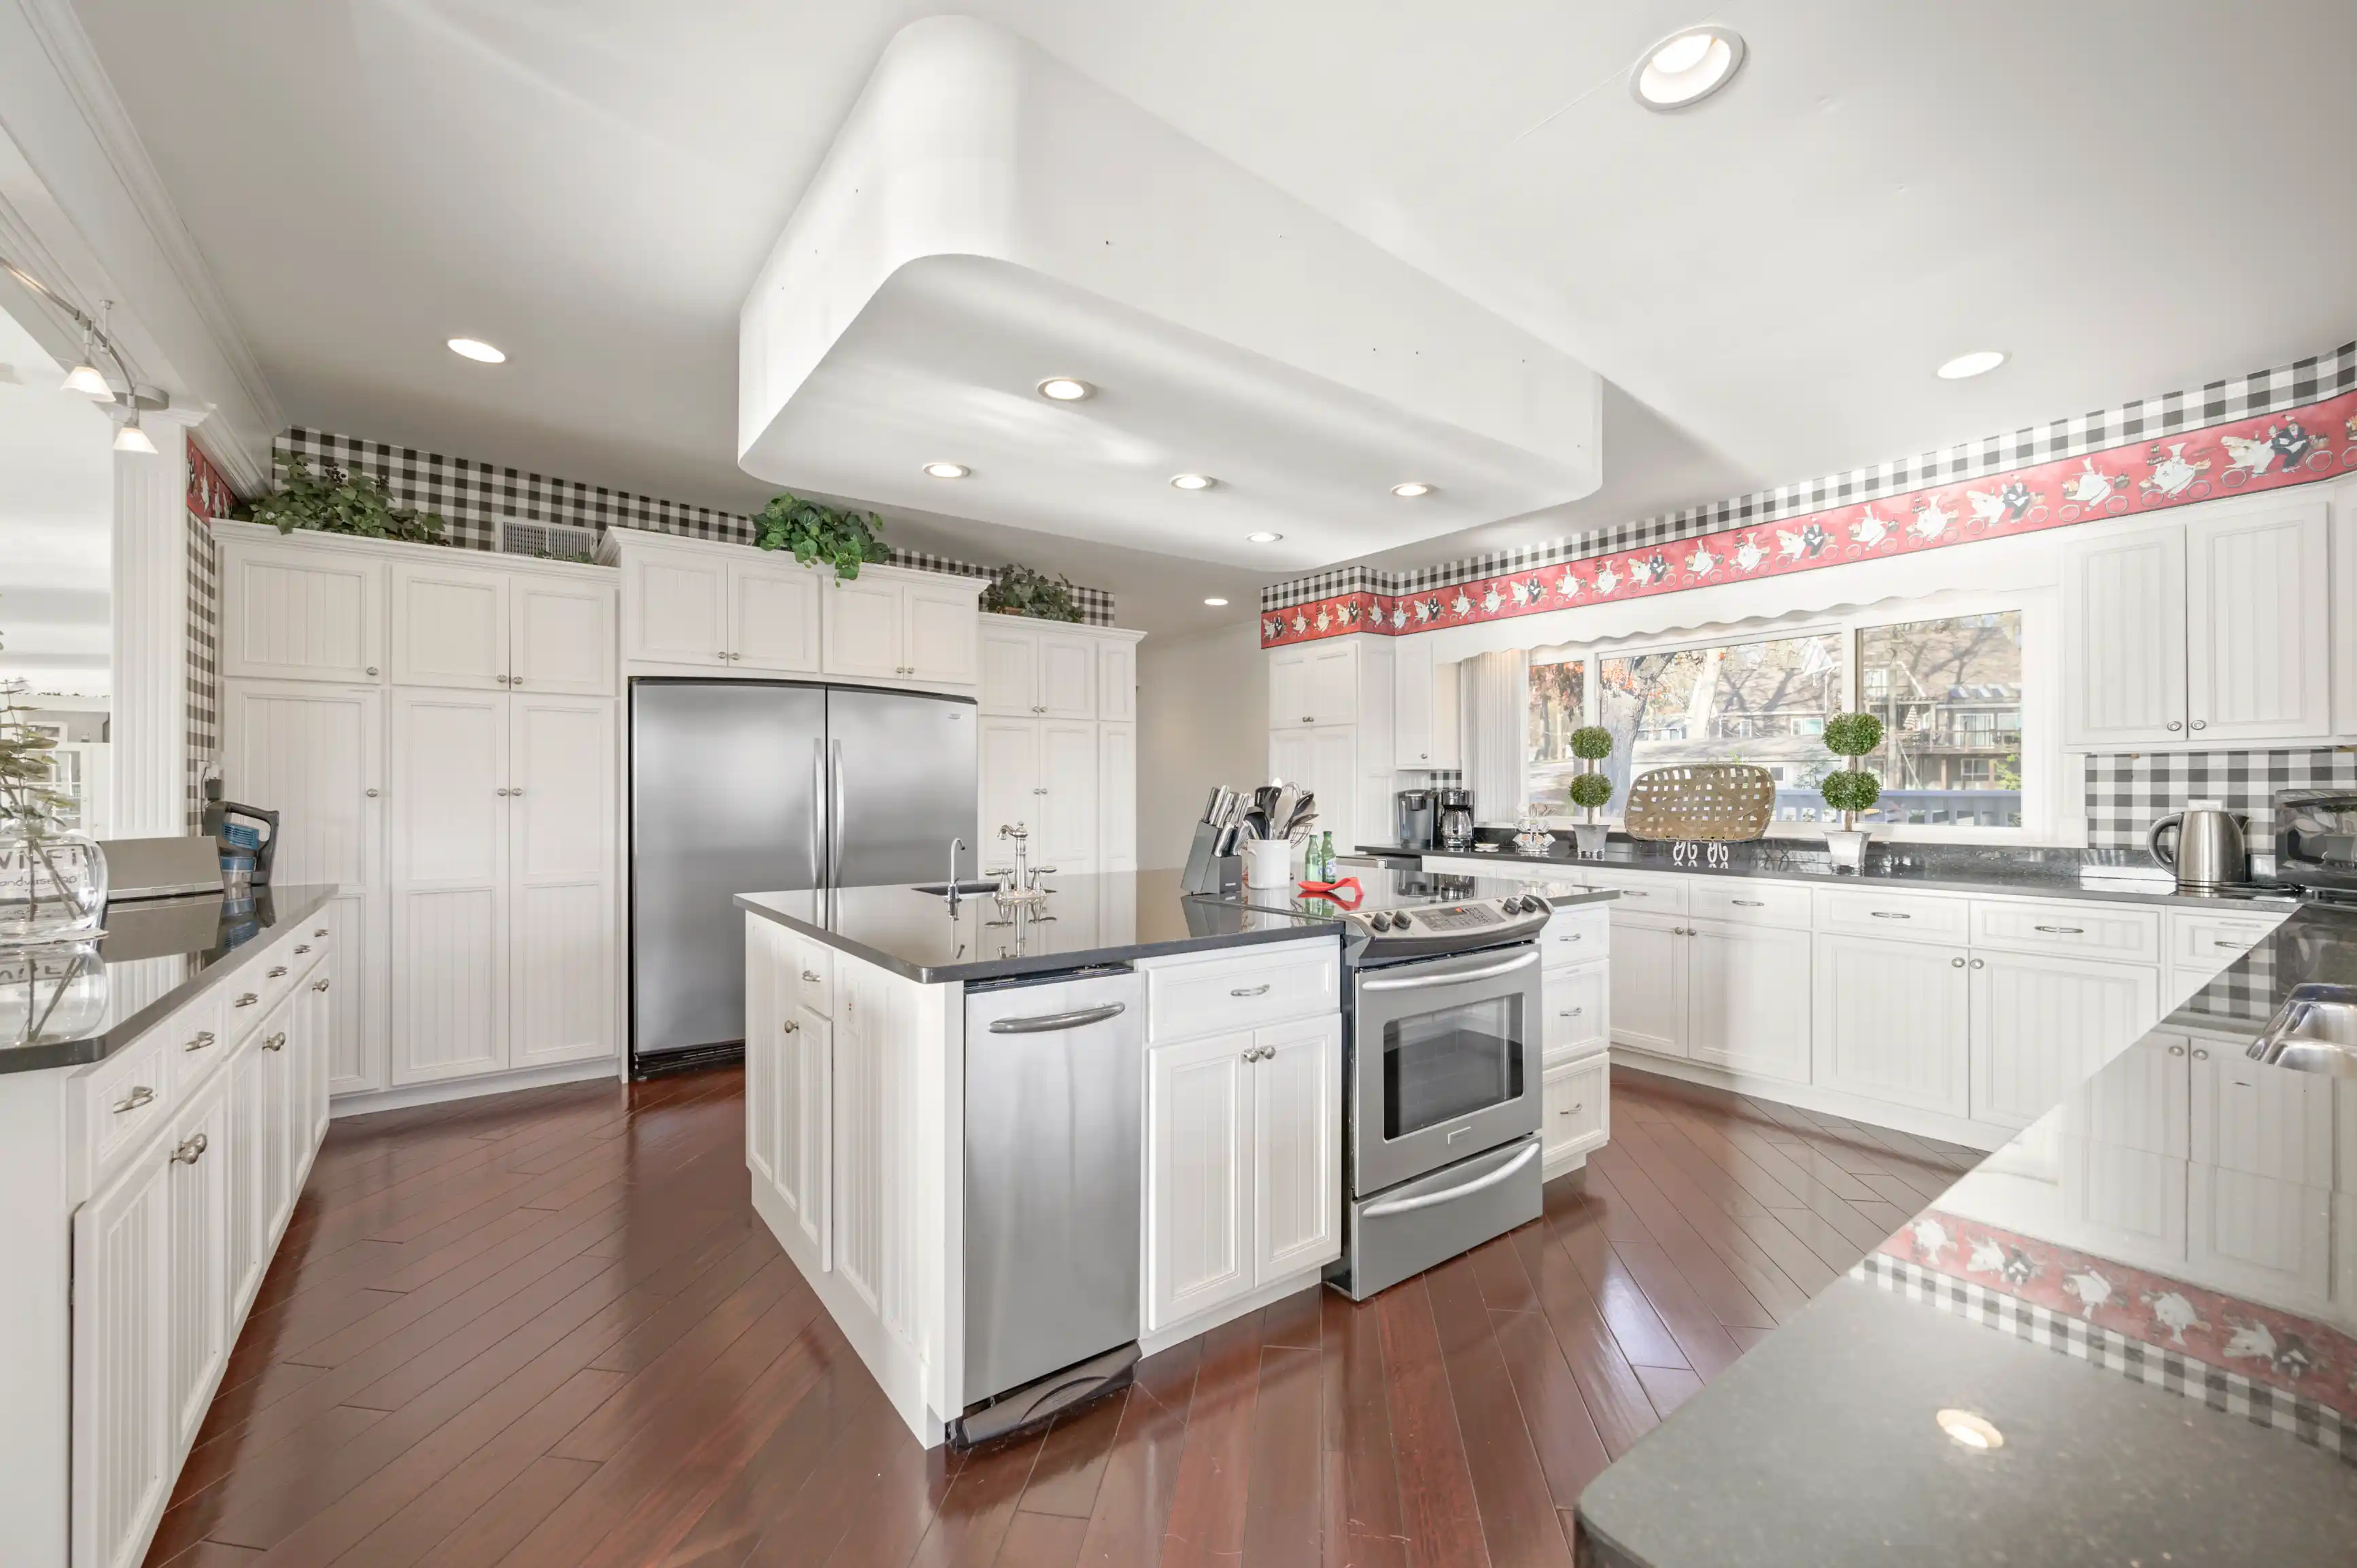 Spacious modern kitchen with white cabinetry, stainless steel appliances, and hardwood flooring.